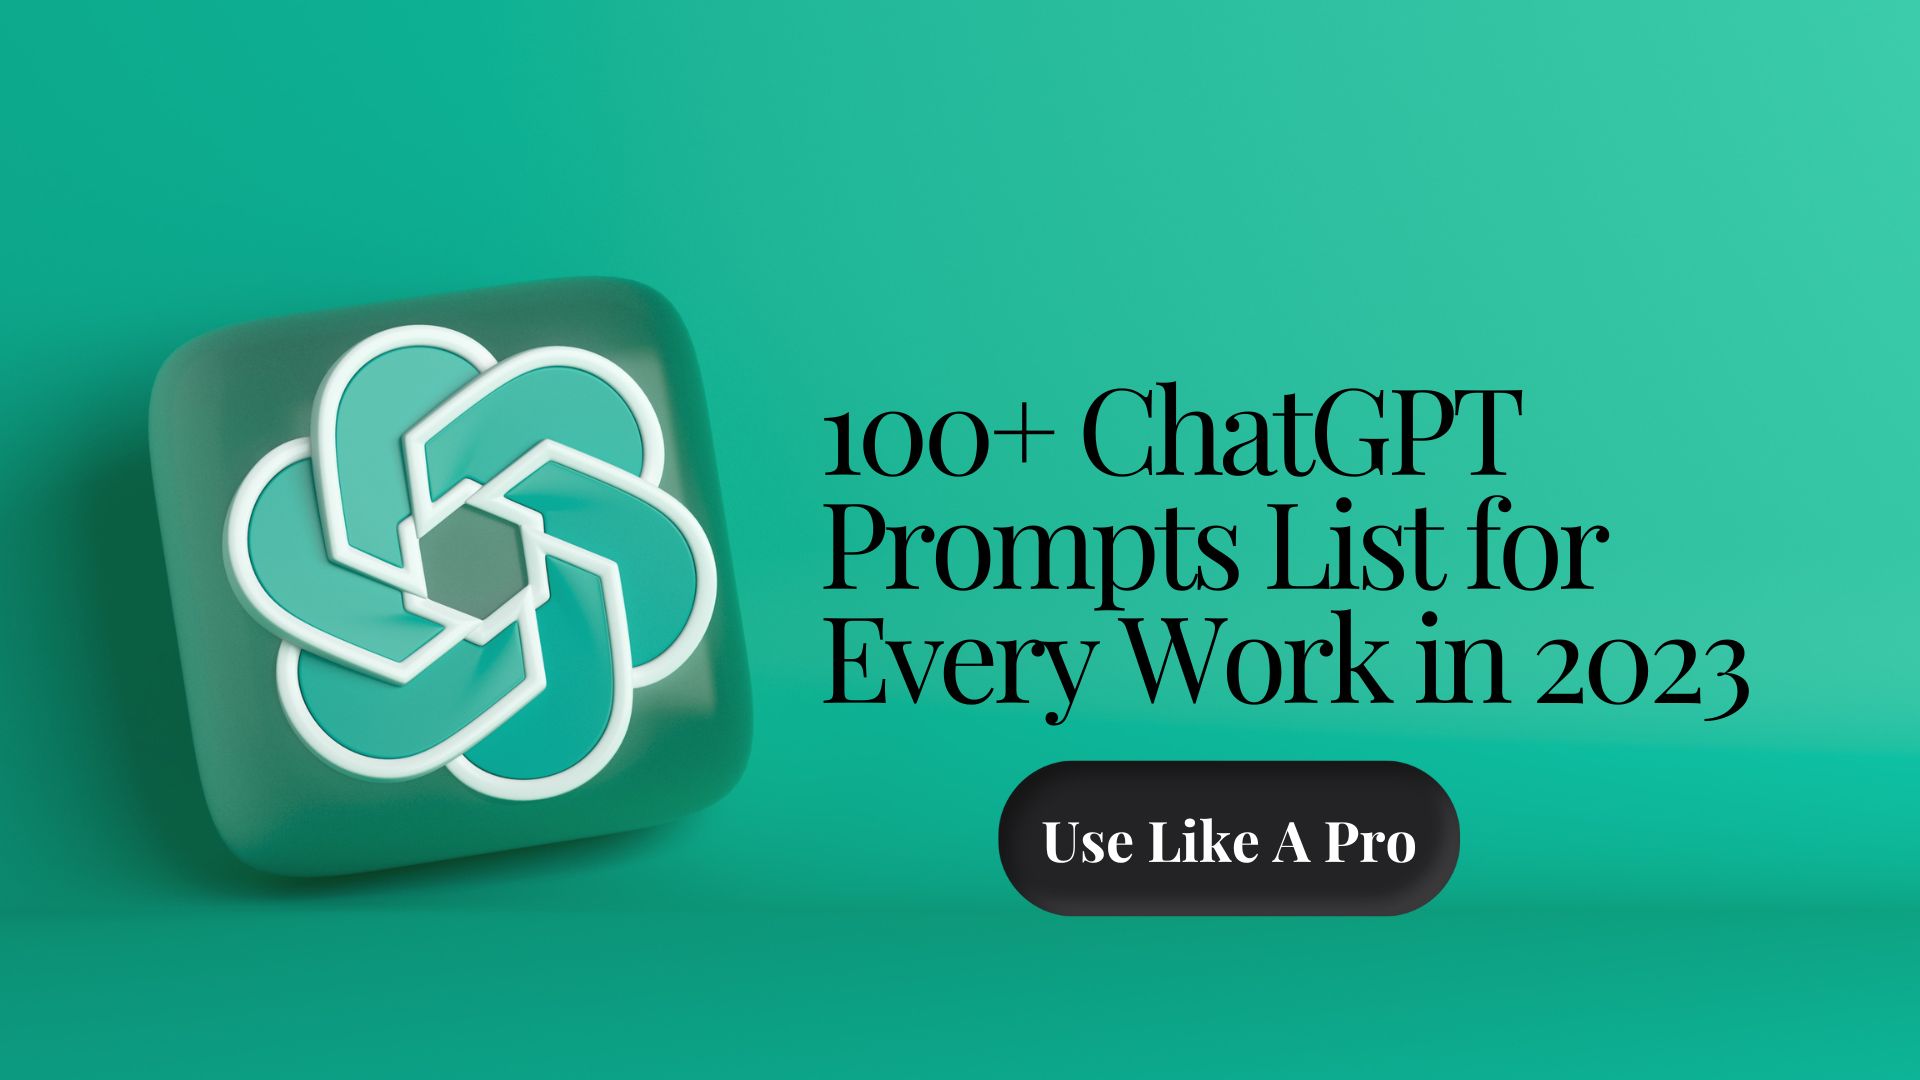 100+ ChatGPT Prompts List for Every Work in 2023